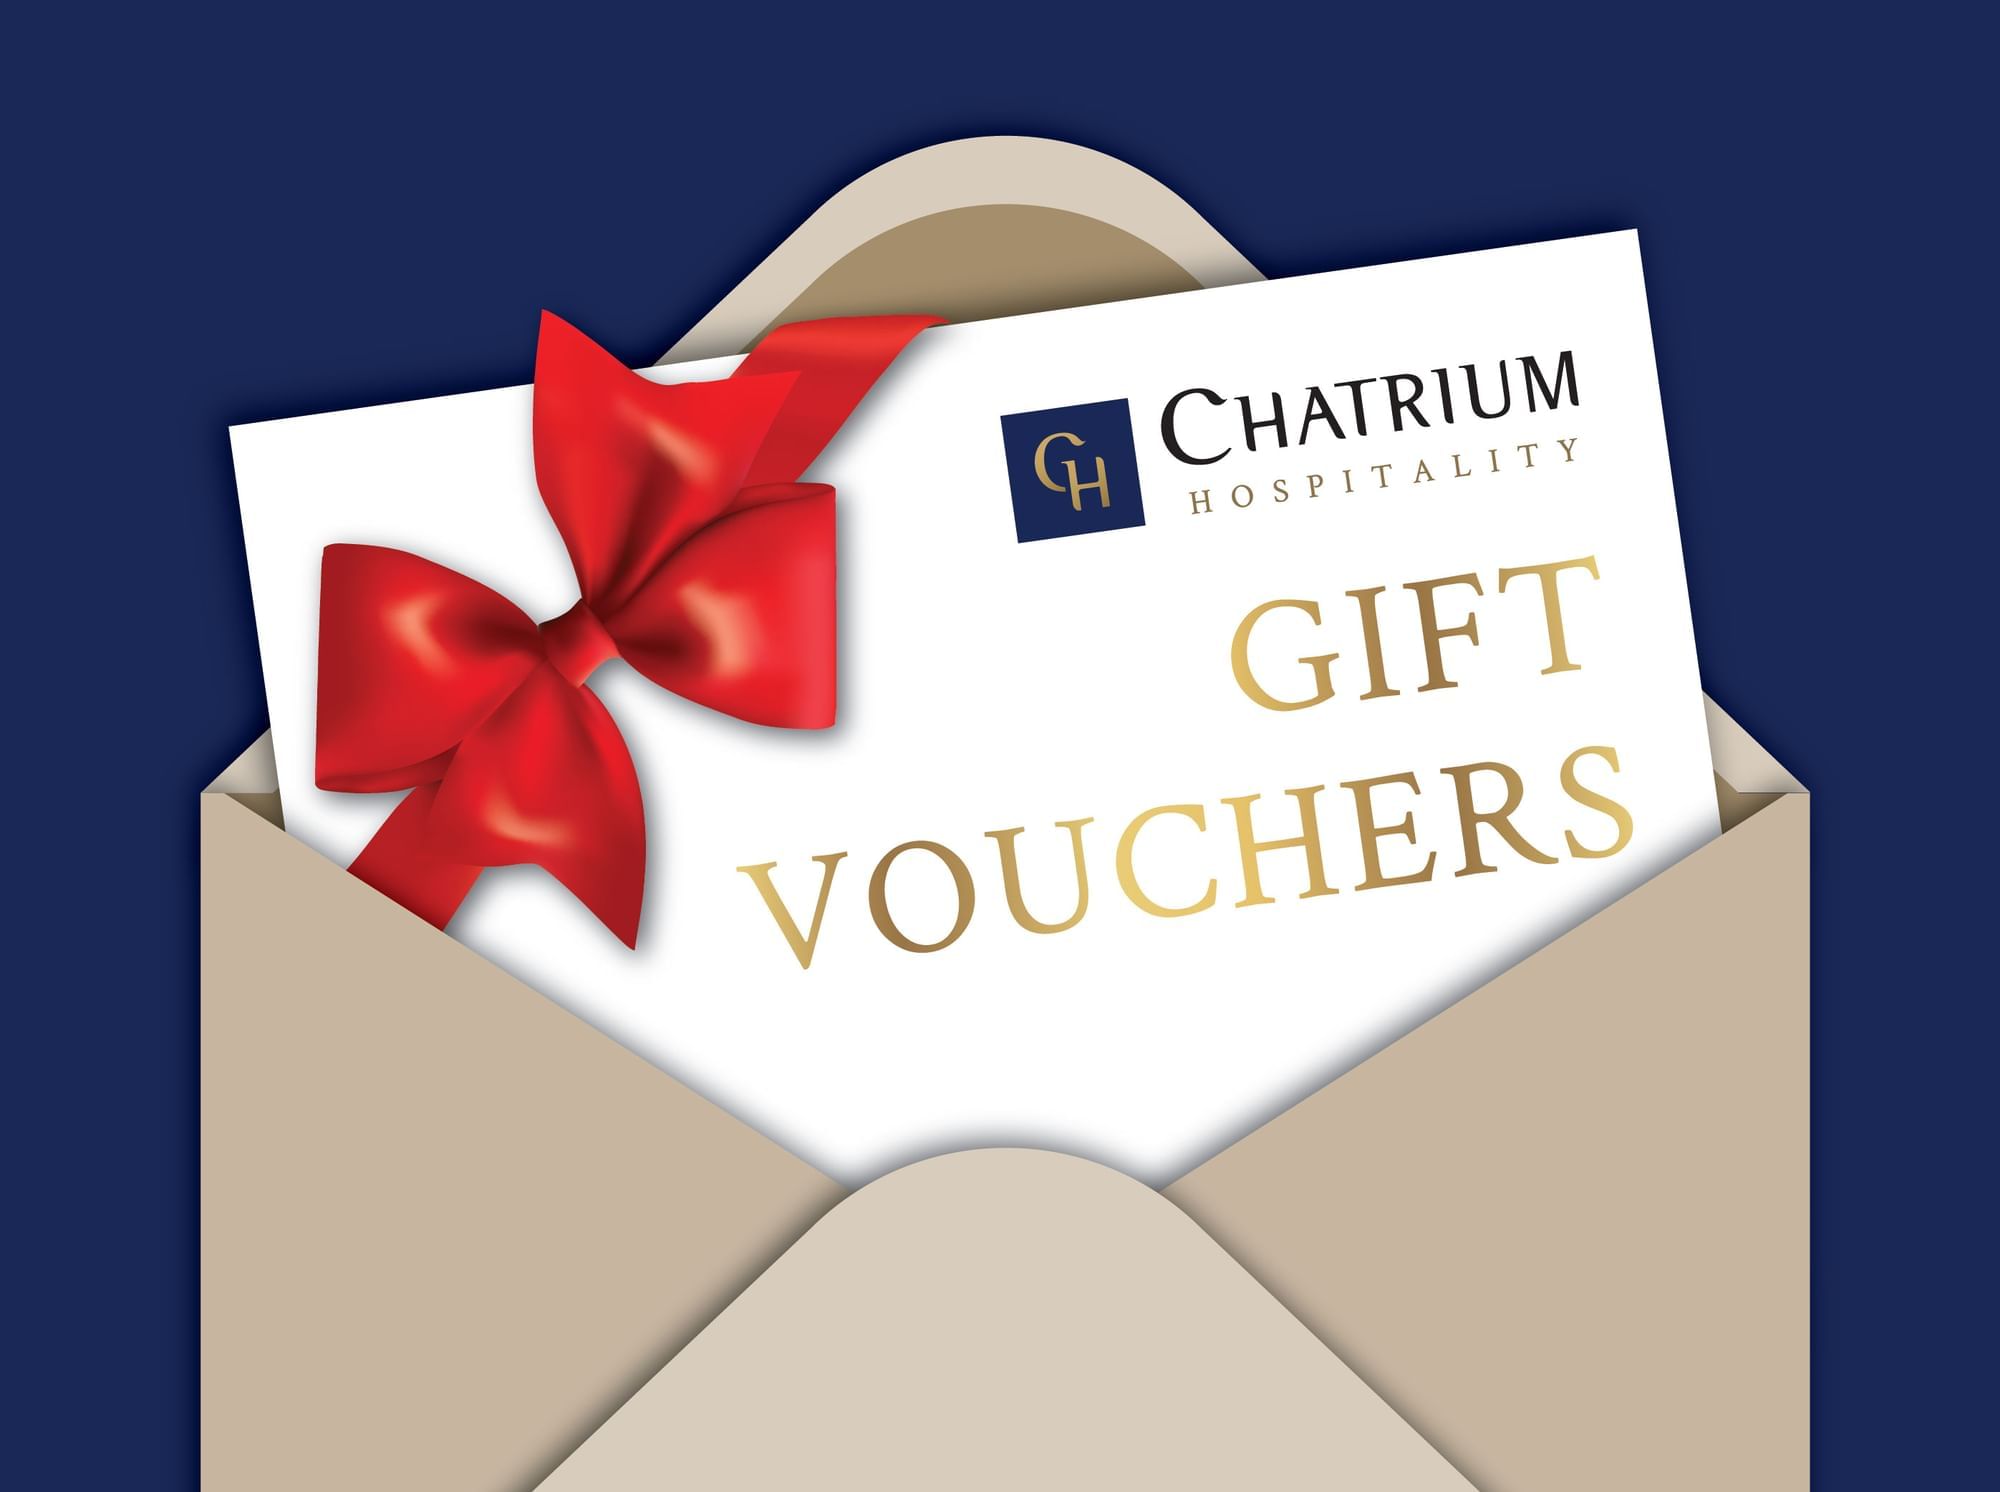 Lake of Shadows Hotel - Gift an experience to remember - The Lake of  Shadows gift vouchers are available to buy online or at reception.  https://bit.ly/3Q6VS08 #giftvouchers #DonegalHotel #Gift #HotelGift  #christmasgift #BirthdayGift #